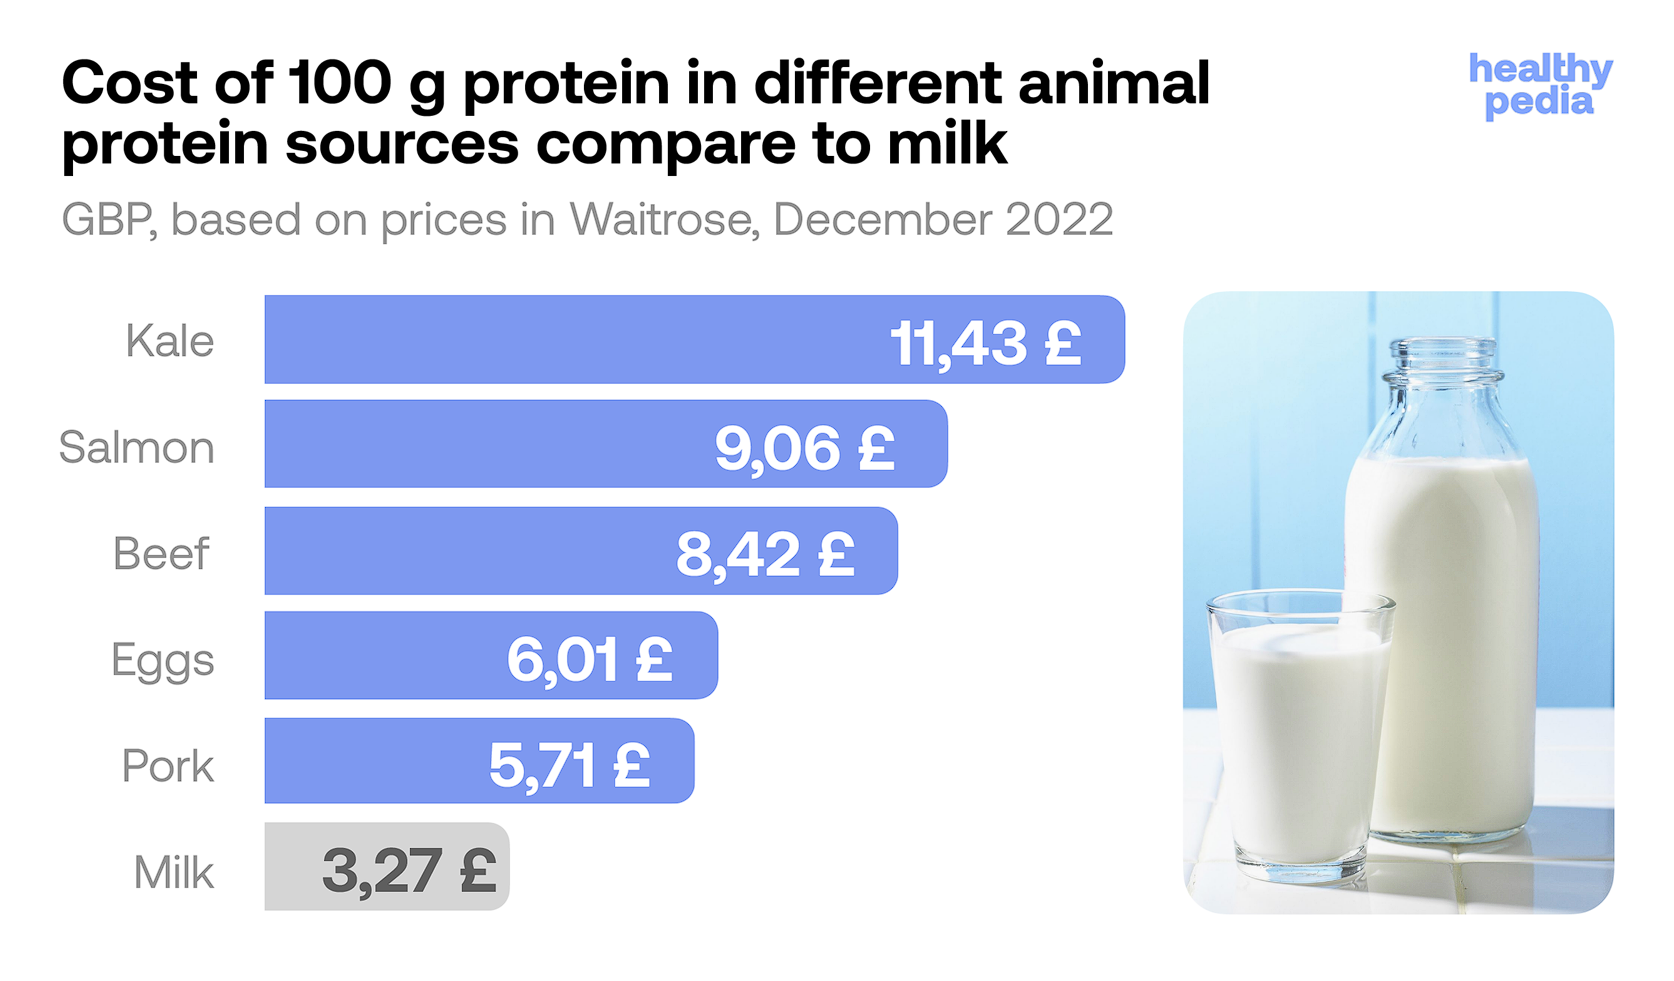 Cost of 100g protein in different animal protein sources compare to milk, stats